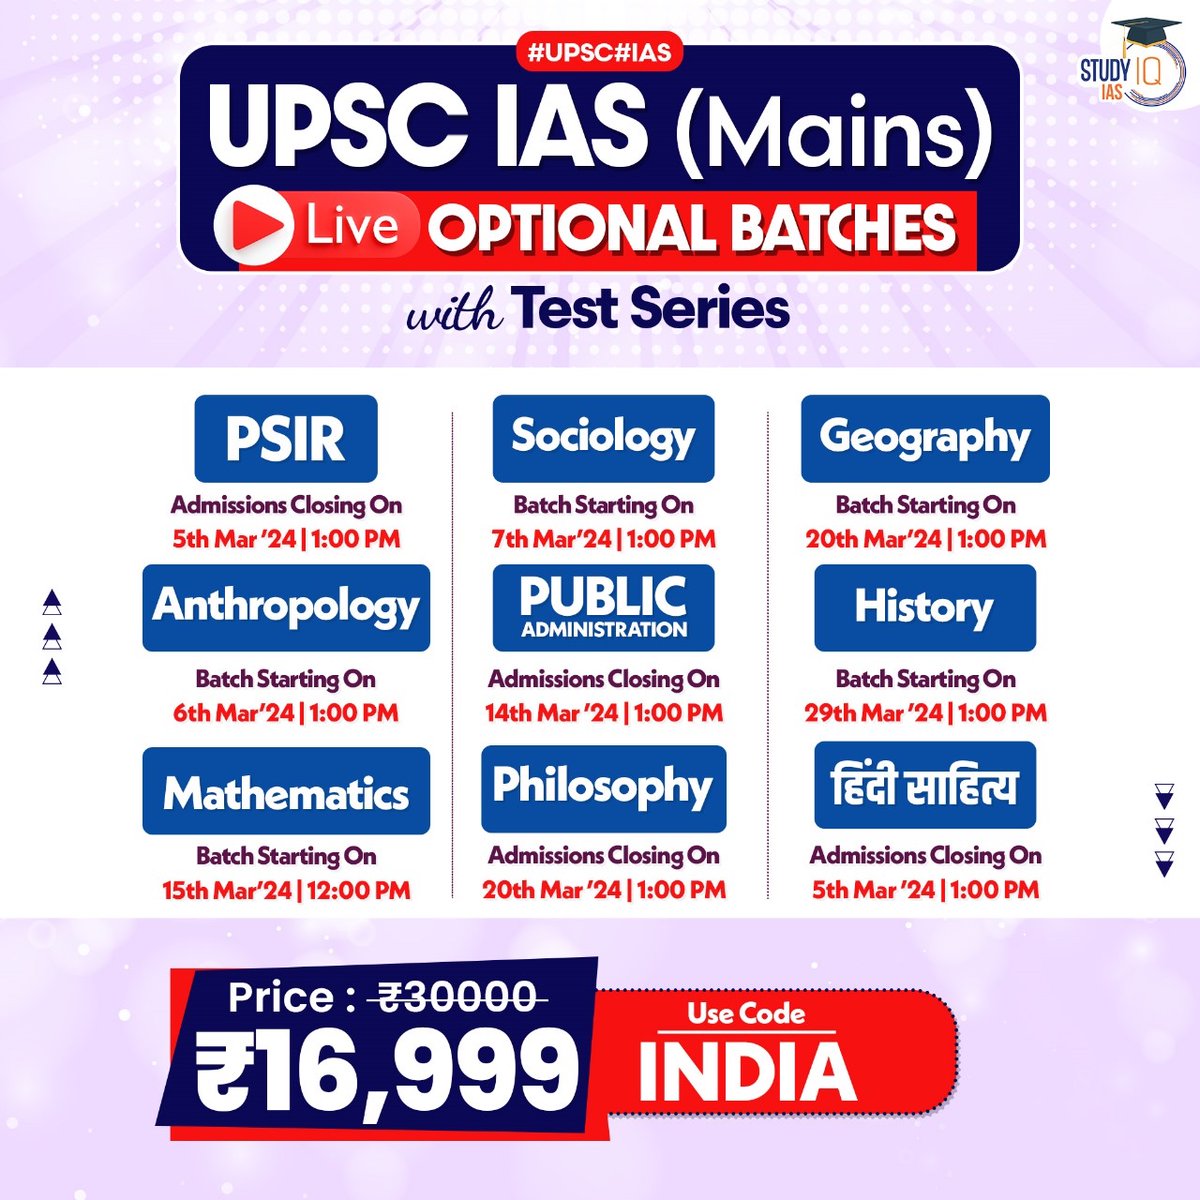 Dear Students, Optional plays a key role in UPSC CSE selections. StudyIQ IAS offers 9 Optionals taught by best faculties to help you Ace the examination. For any queries please reach out to: 080-6897-3353 Check out the courses here: bit.ly/3FEJnnJ